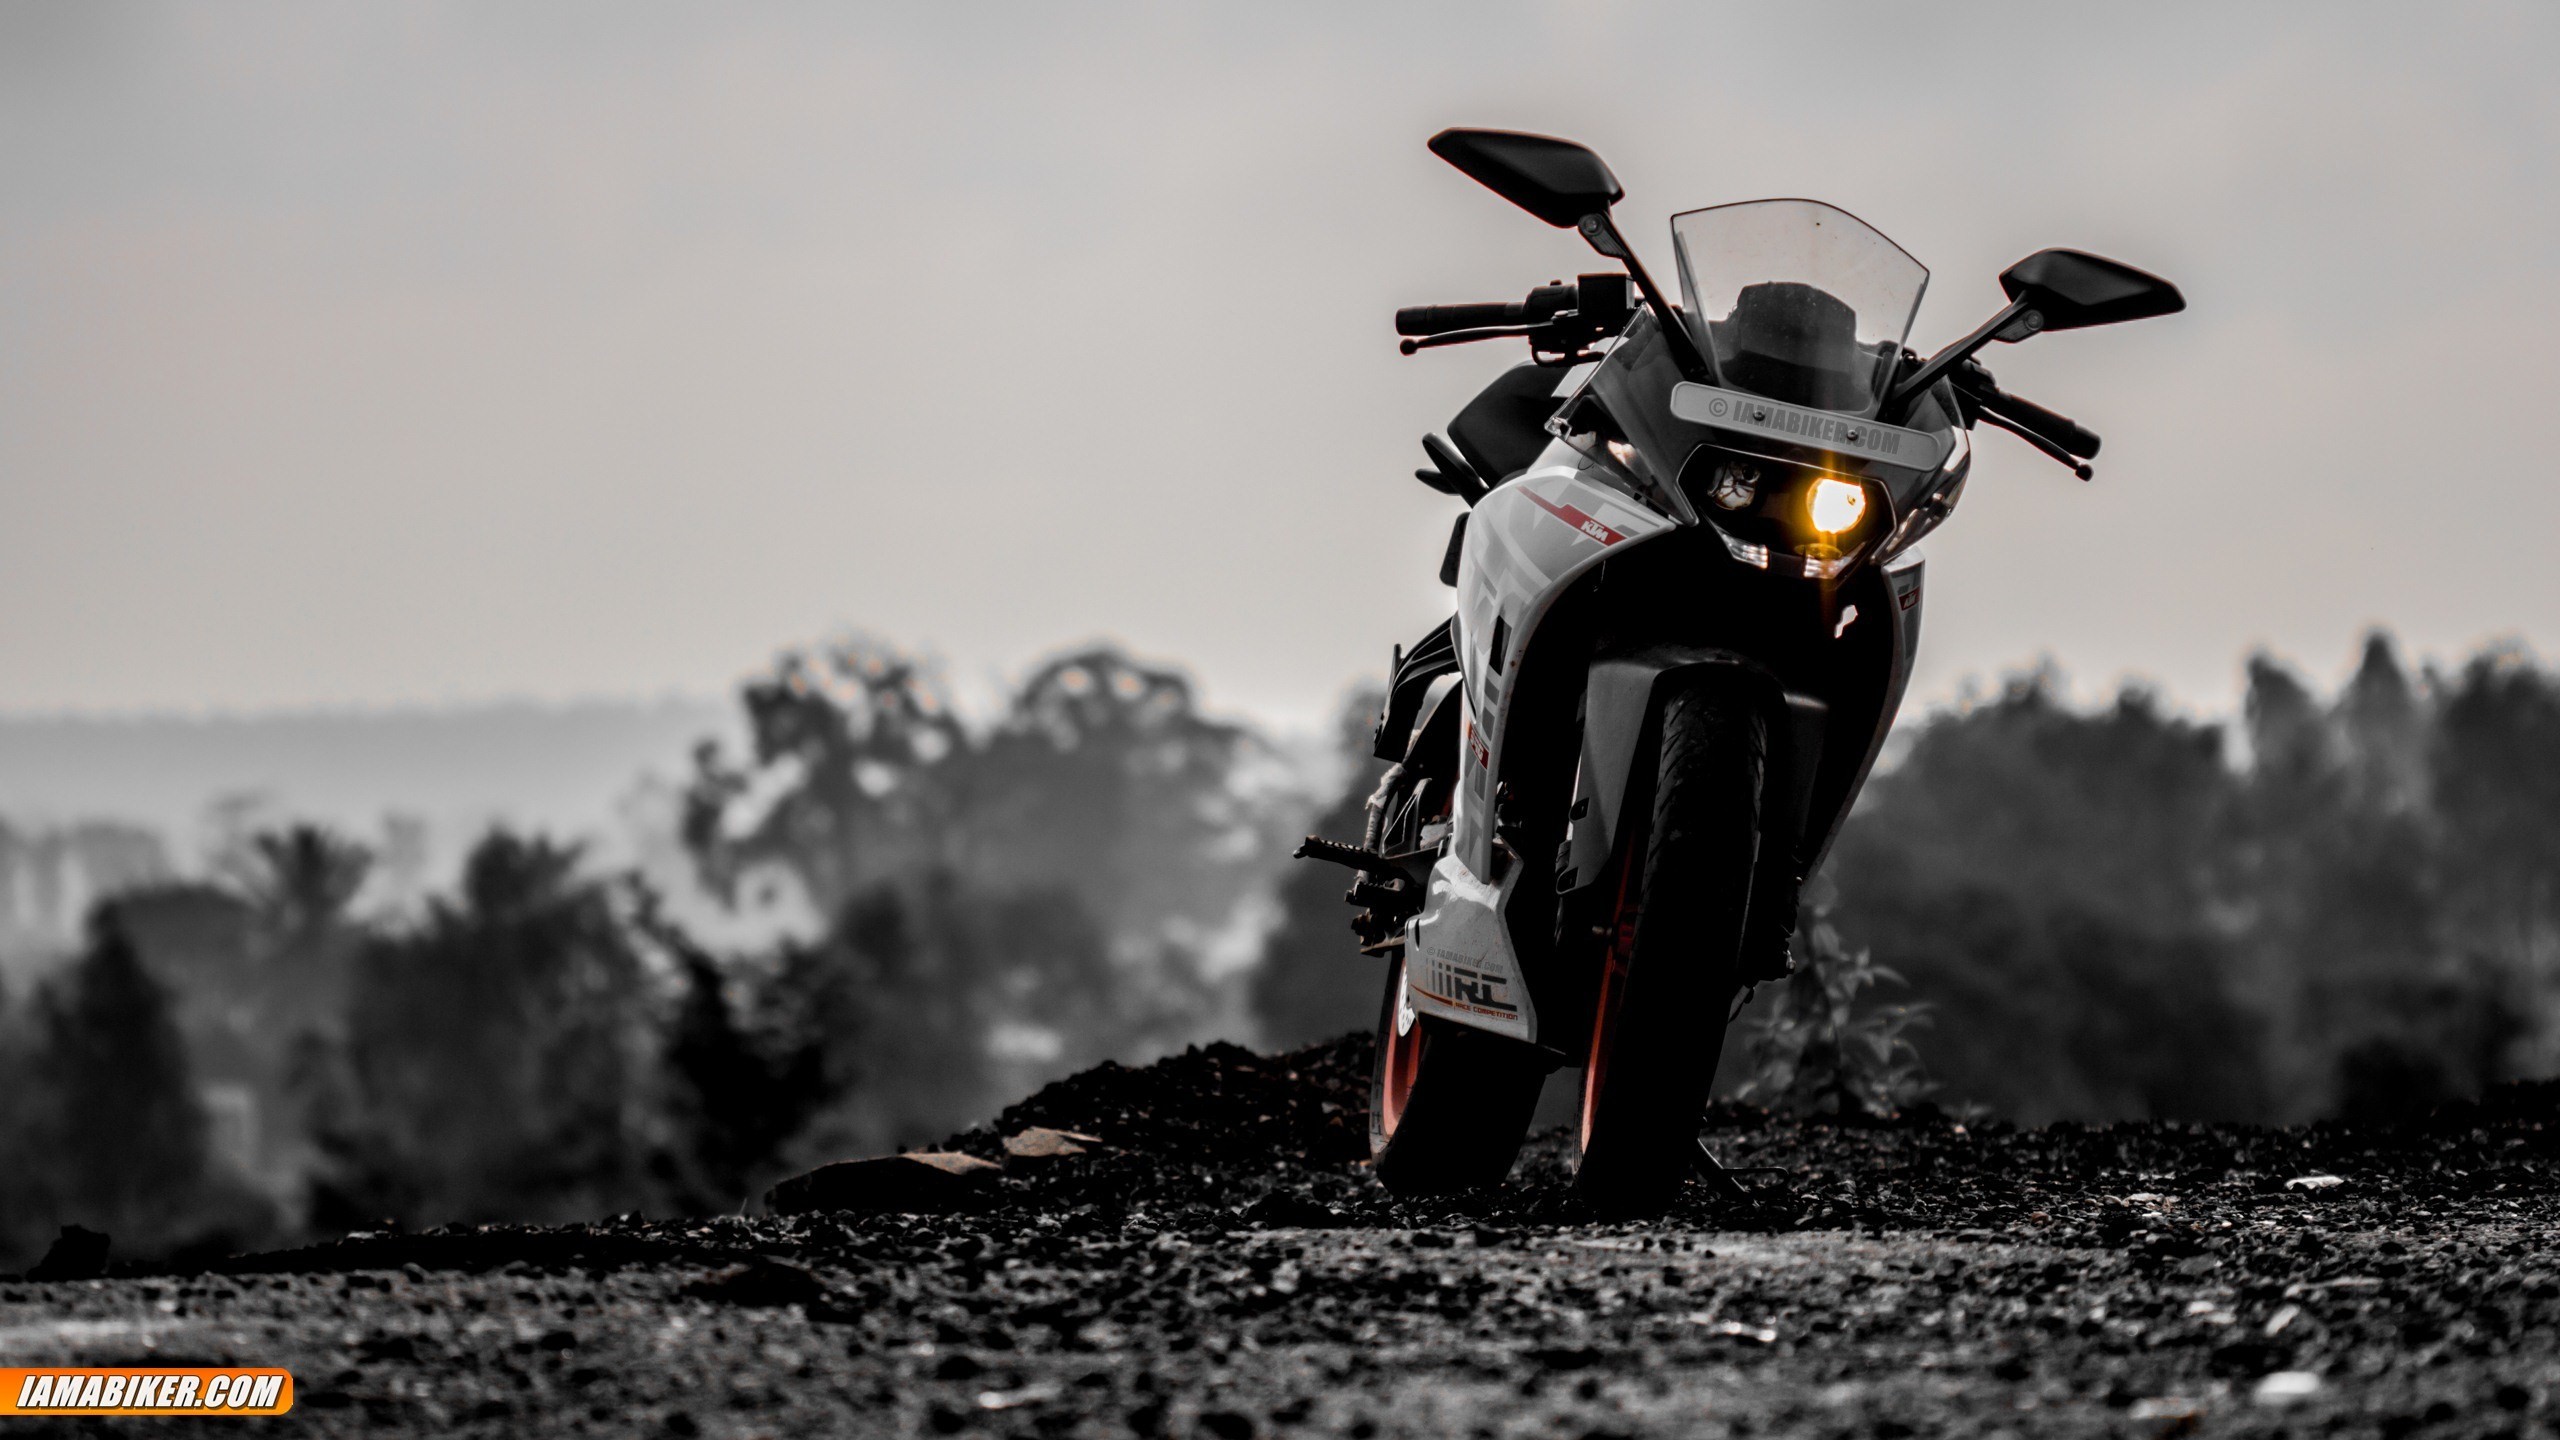 2560x1440 KTM RC 390 wallpapers - 3